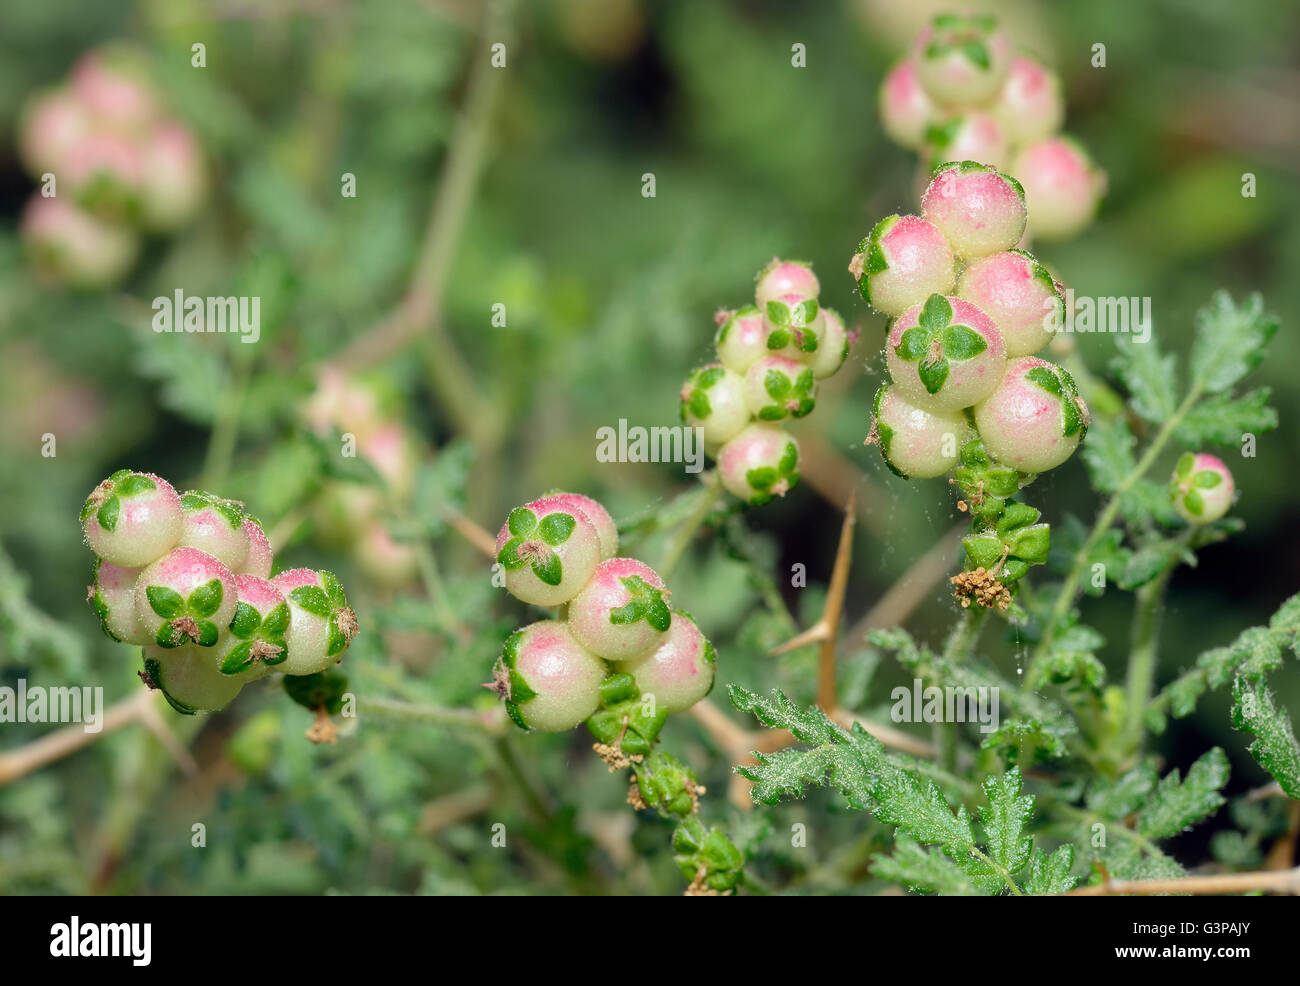 Spiny or Thorny Burnet - Sarcopoterium spinosum Showing Male & Female Flowers Stock Photo